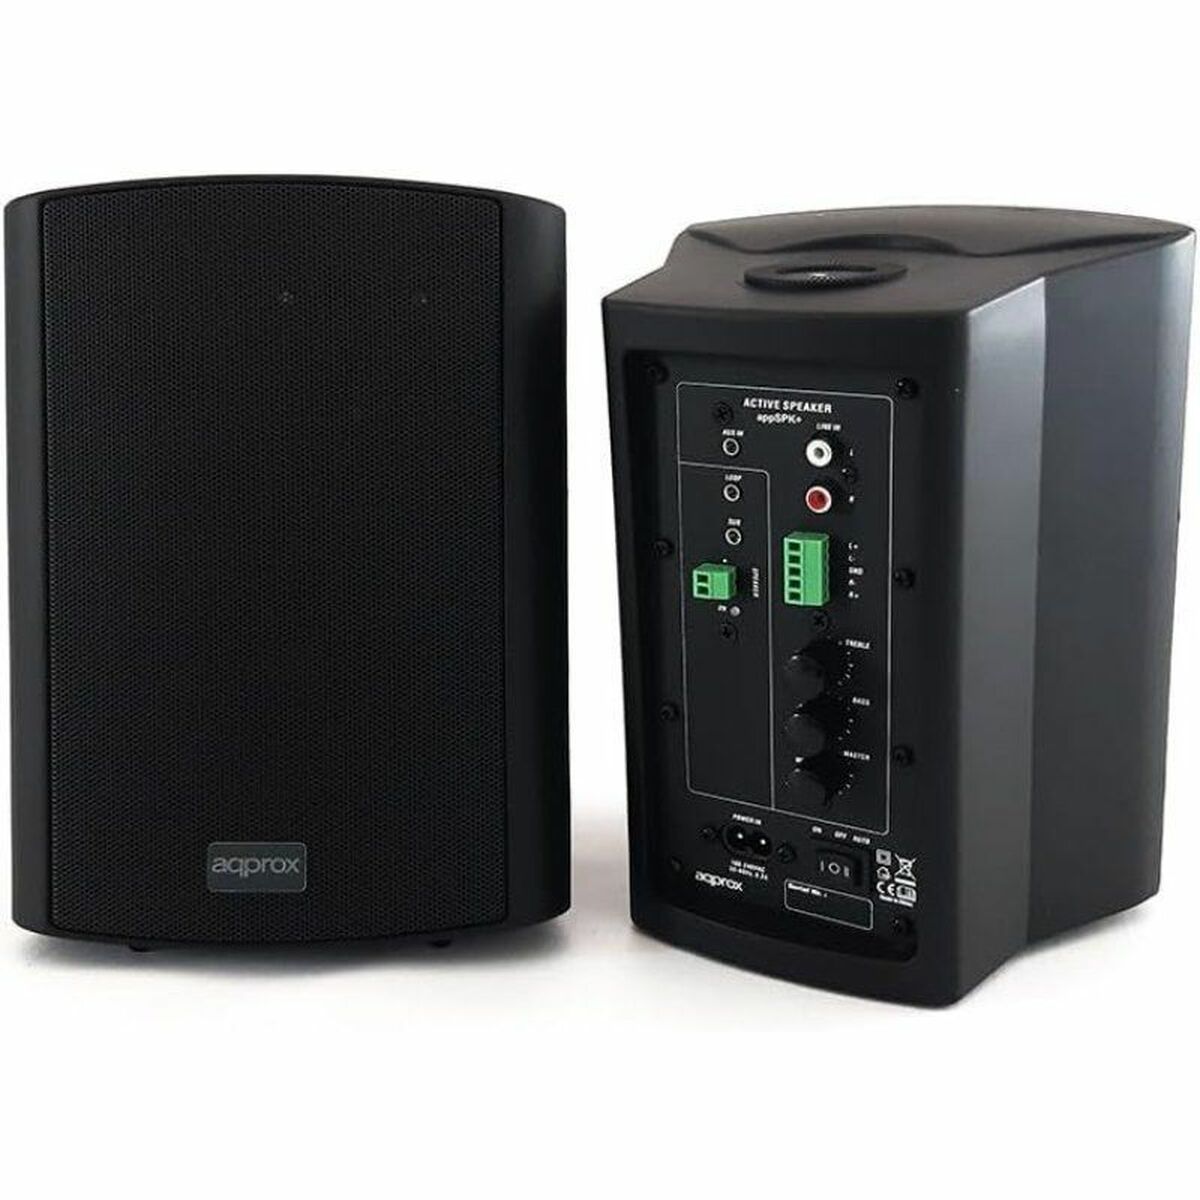 PC Speakers APPROX APPSPK+BK Black 60 W, APPROX, Computing, Accessories, pc-speakers-approx-appspk-bk-black-60-w, Brand_APPROX, category-reference-2609, category-reference-2642, category-reference-2945, category-reference-t-19685, category-reference-t-19908, category-reference-t-21340, category-reference-t-25571, computers / peripherals, Condition_NEW, entertainment, music, office, Price_100 - 200, Teleworking, RiotNook